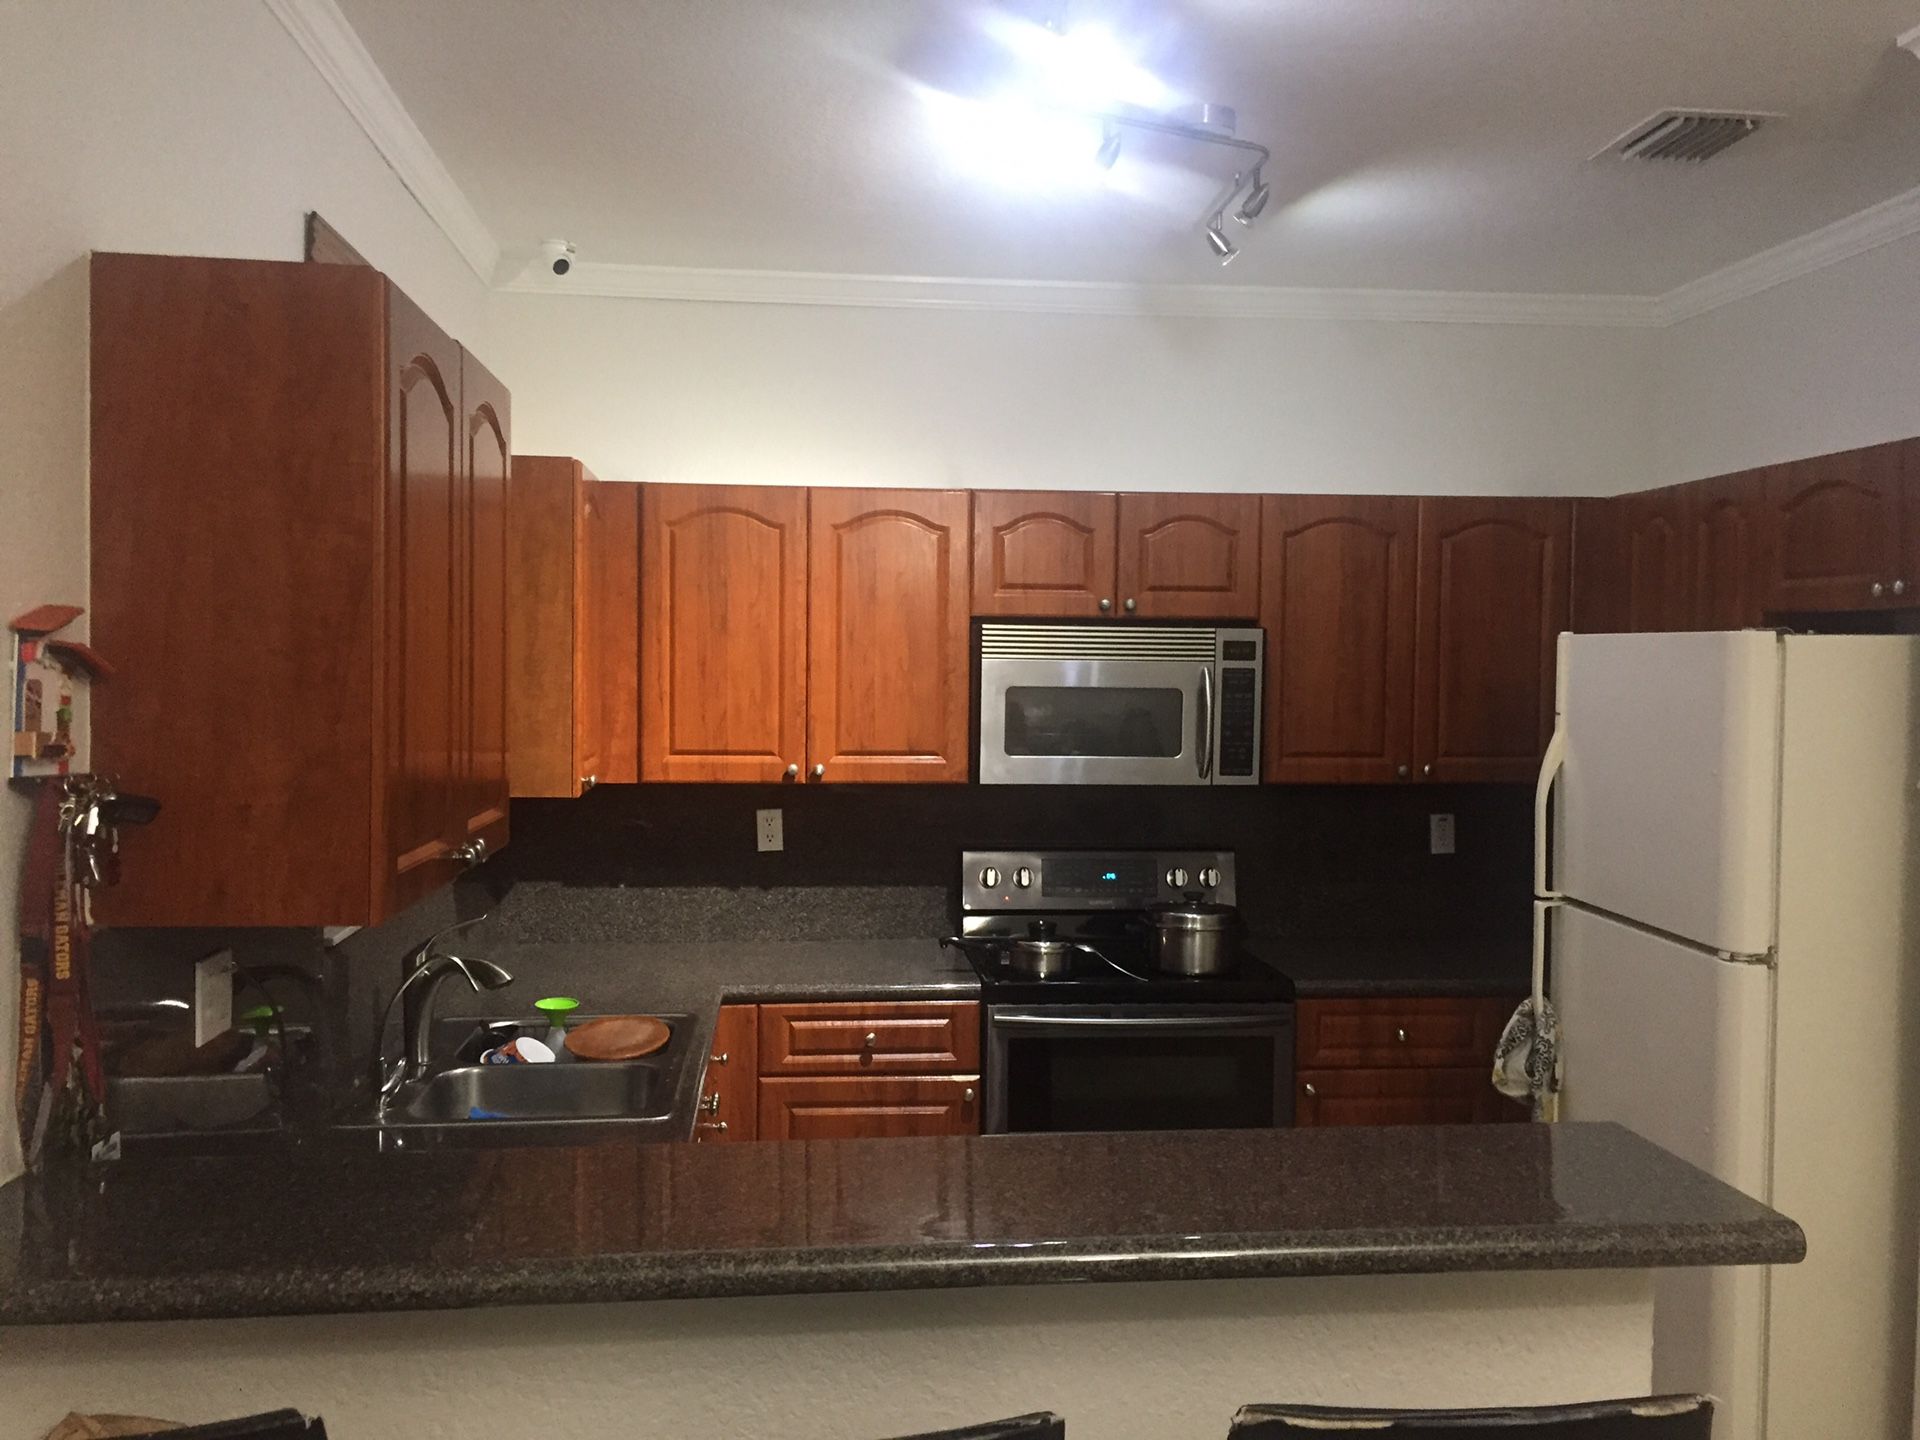 Kitchen cabinets with counter top and backsplash